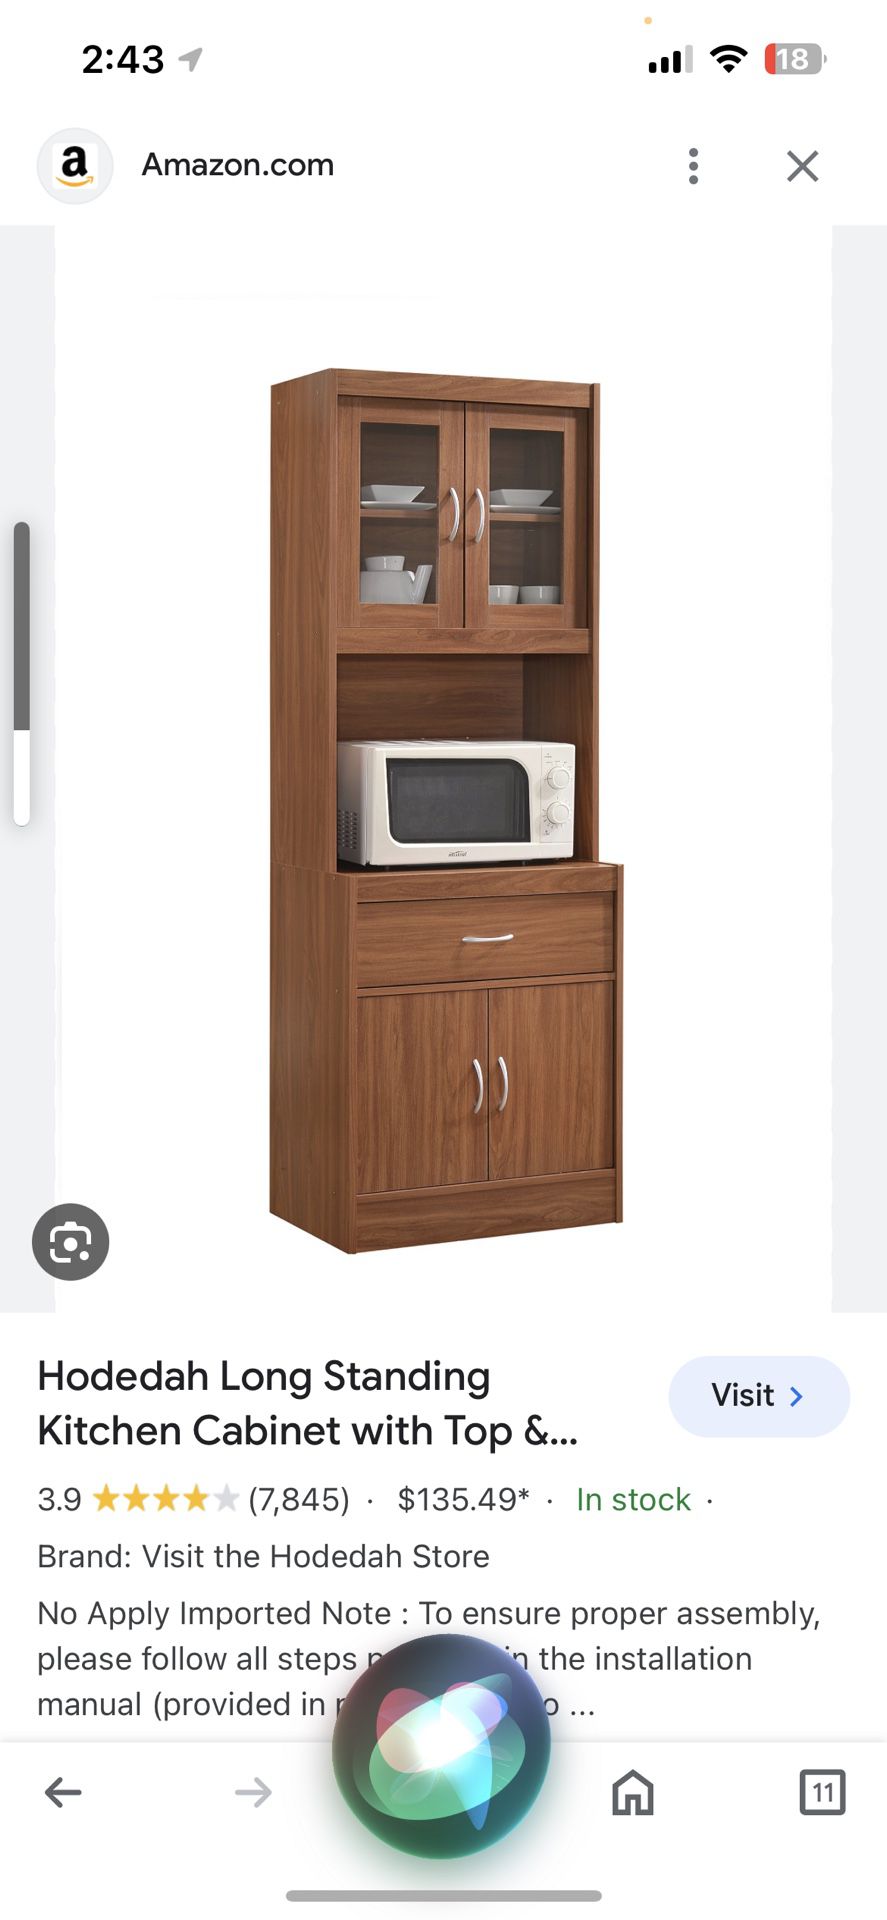 Hodedoh  Long Standing kitchen Cabinet 